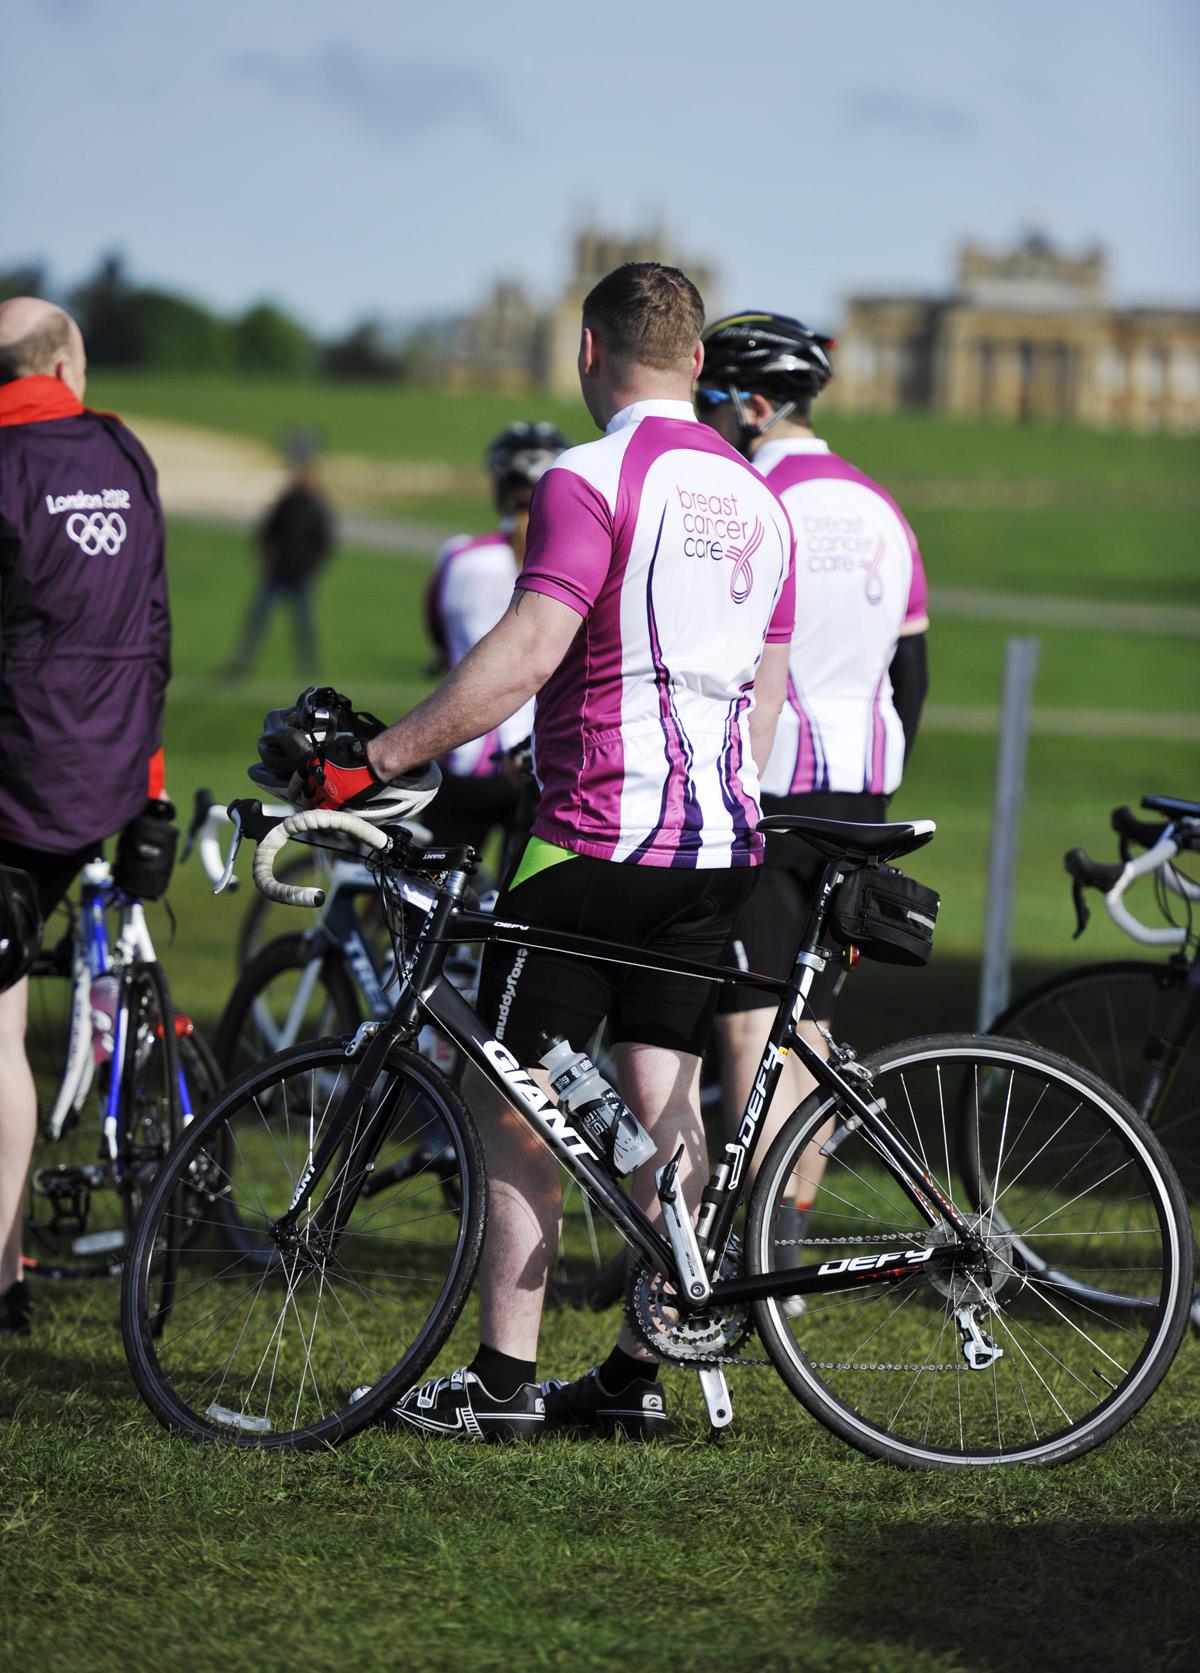 Pictures from the annual Pink Ribbon Walk & Ride which started at Blenheim Palace